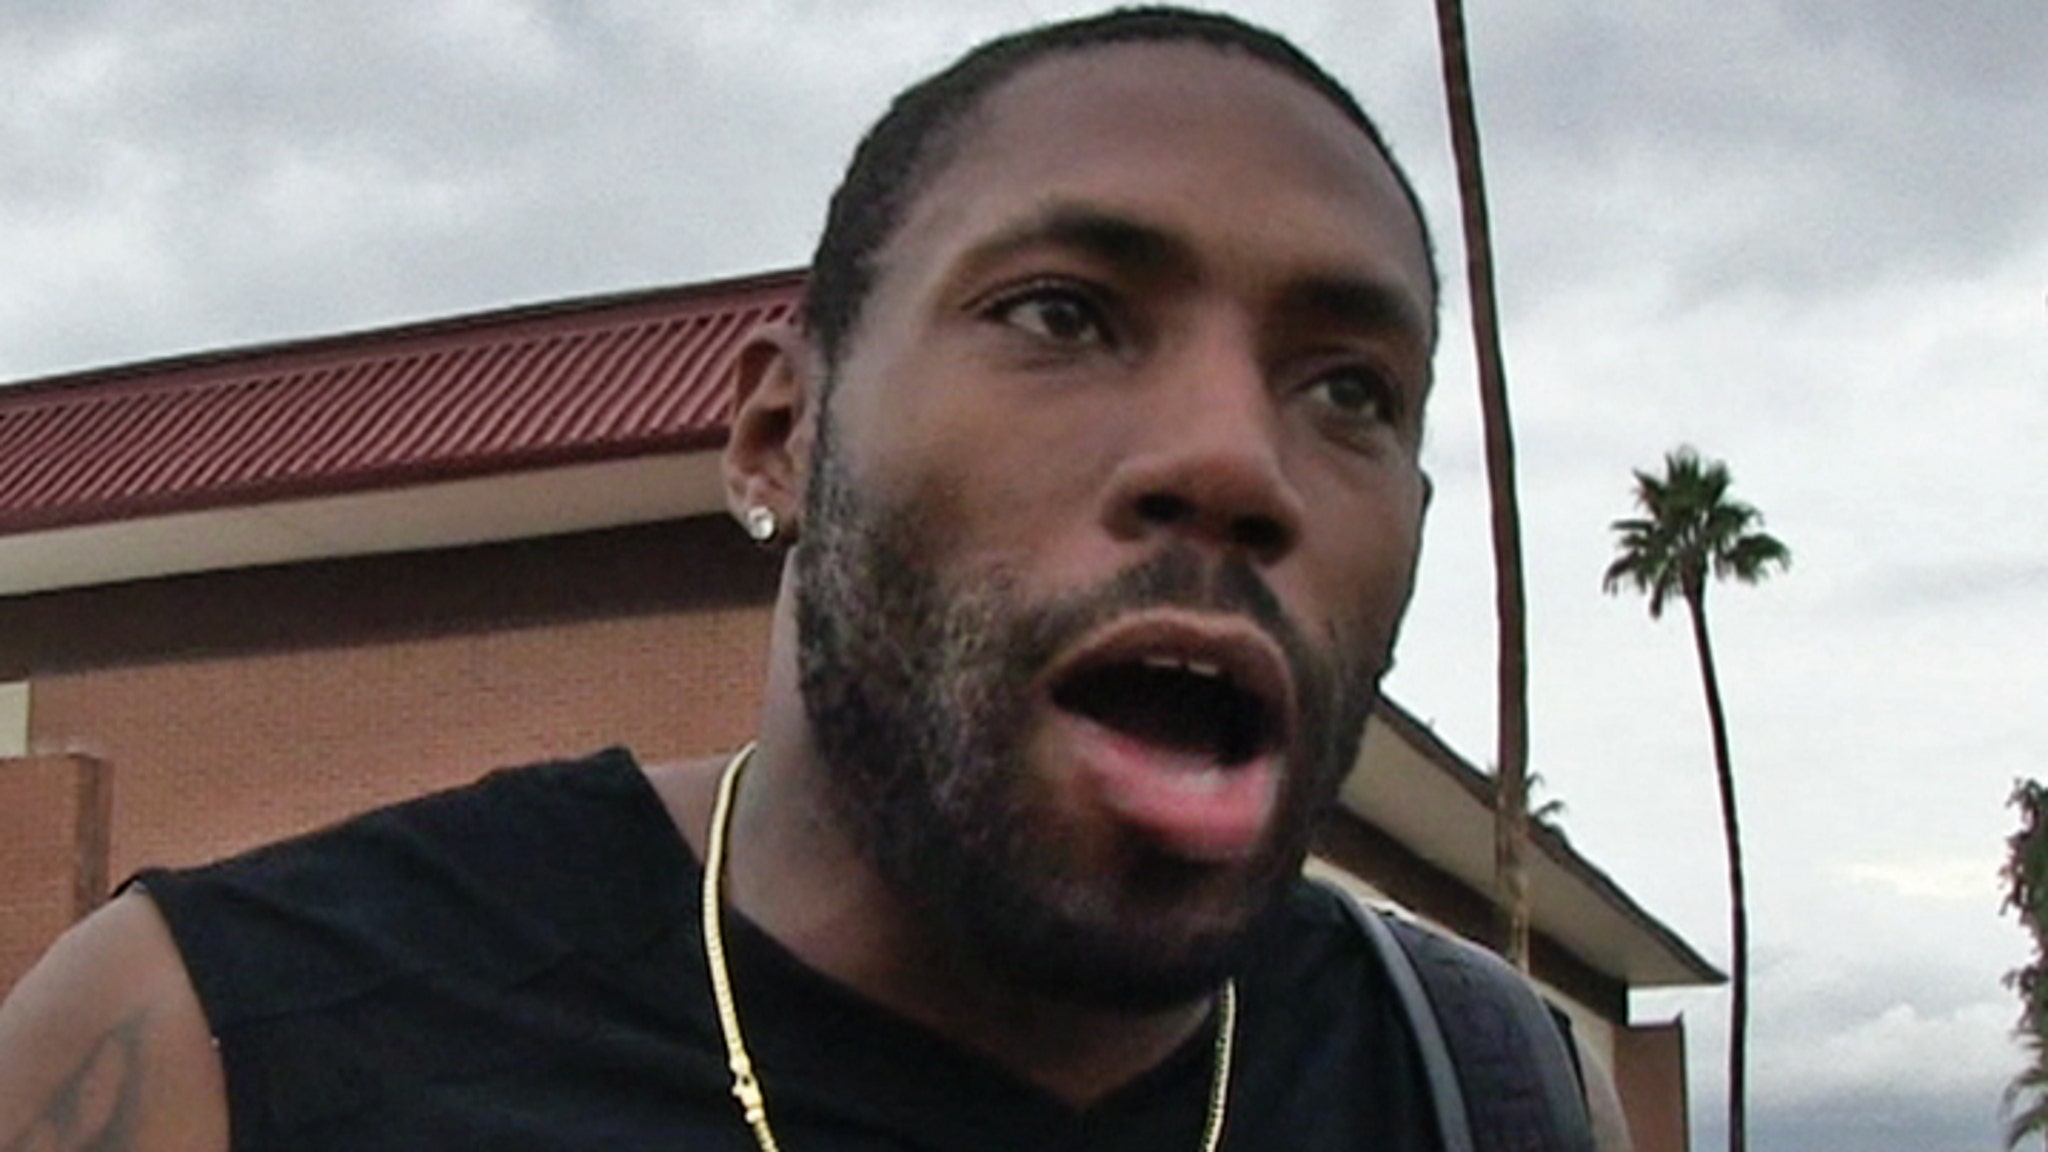 Antonio Cromartie's Evicting Mother From House